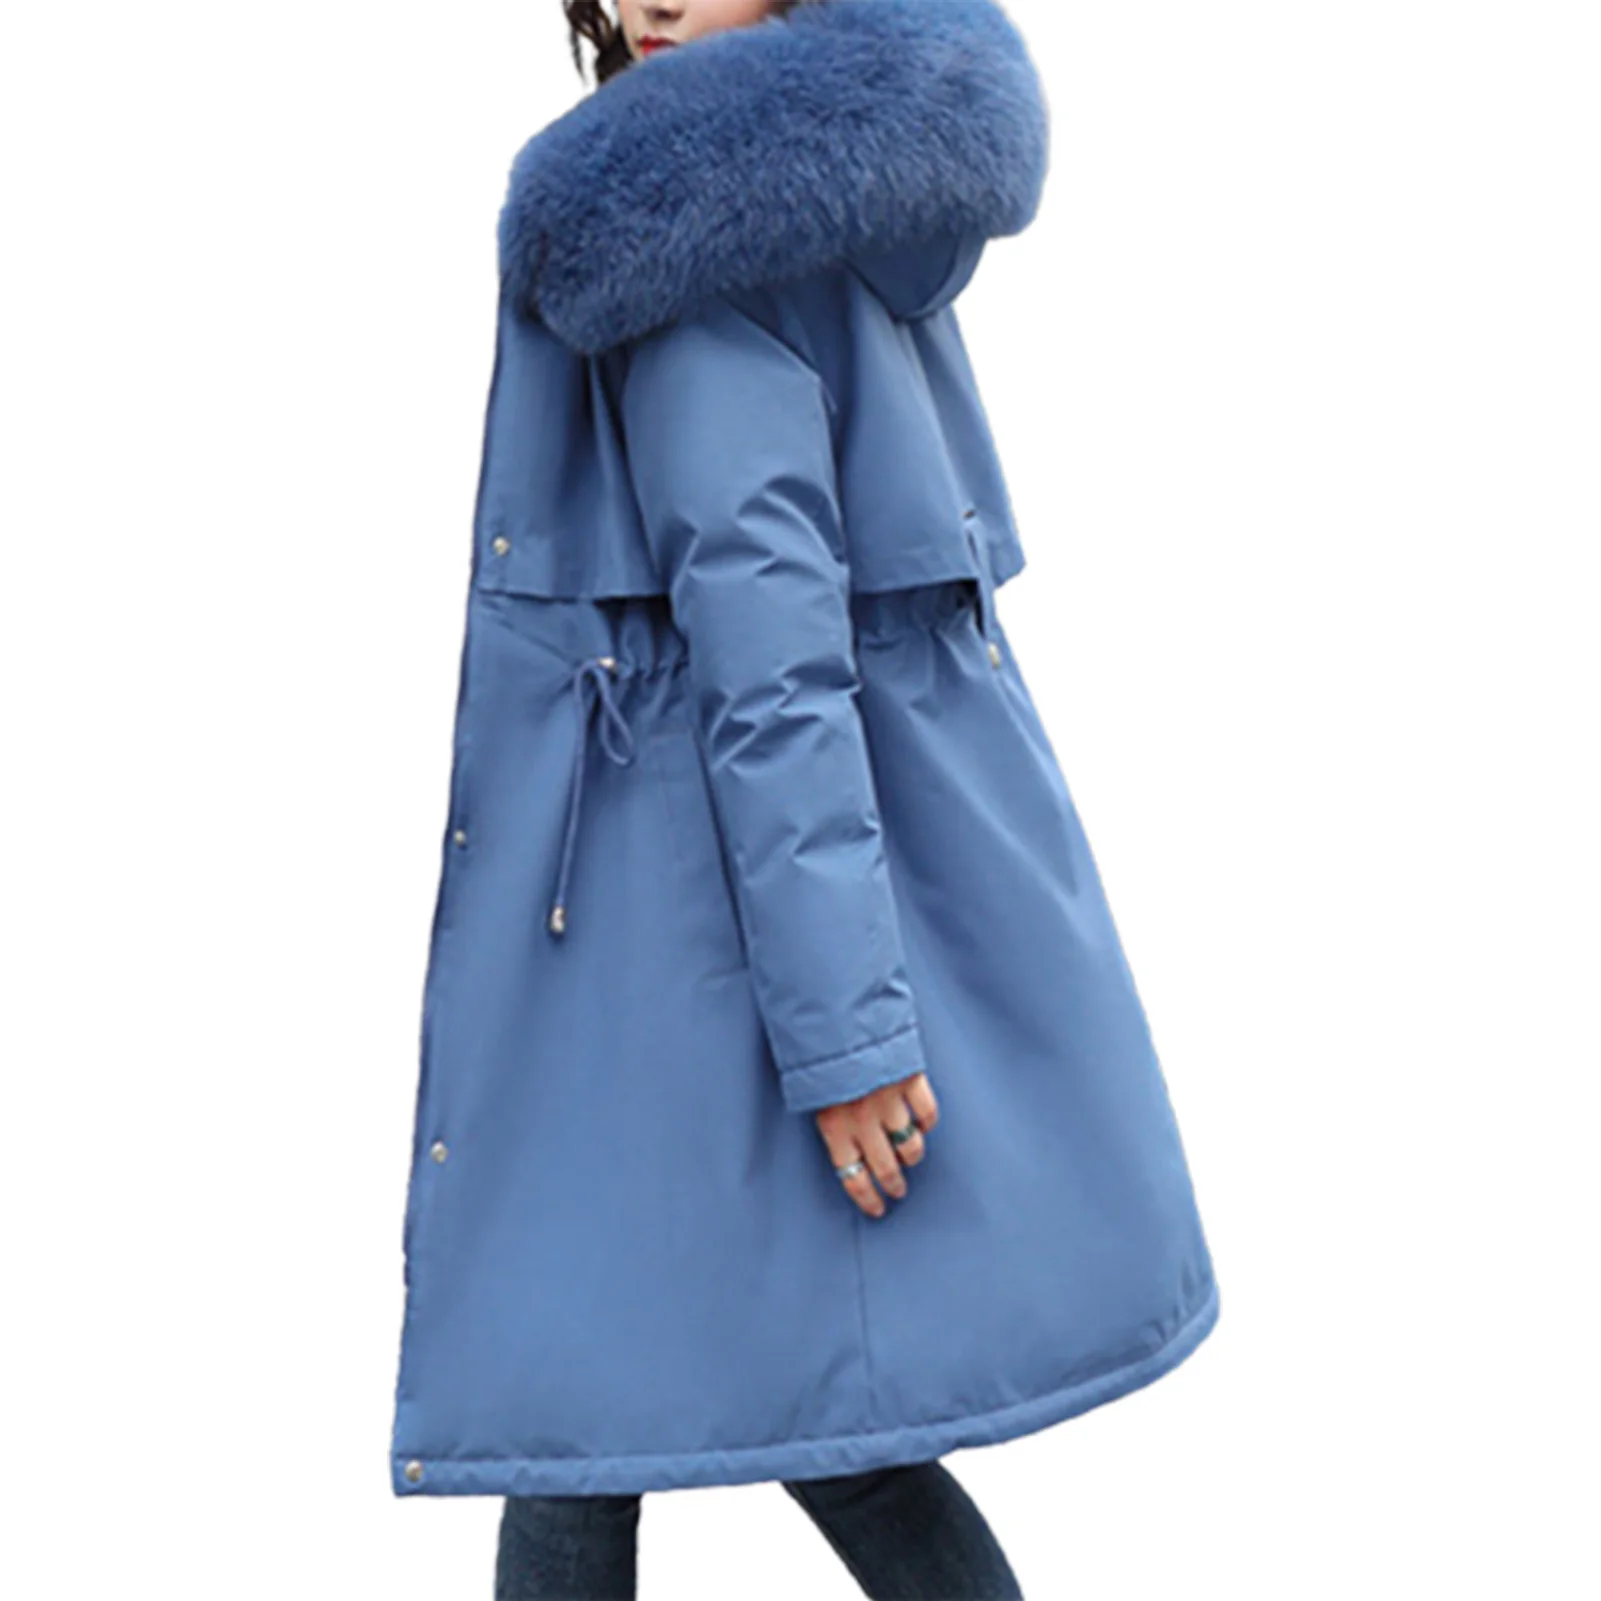 

Women's Hooded Winter Coat Warm Long Puffer Jacket Parka with Hood for Cold Weather Outwear